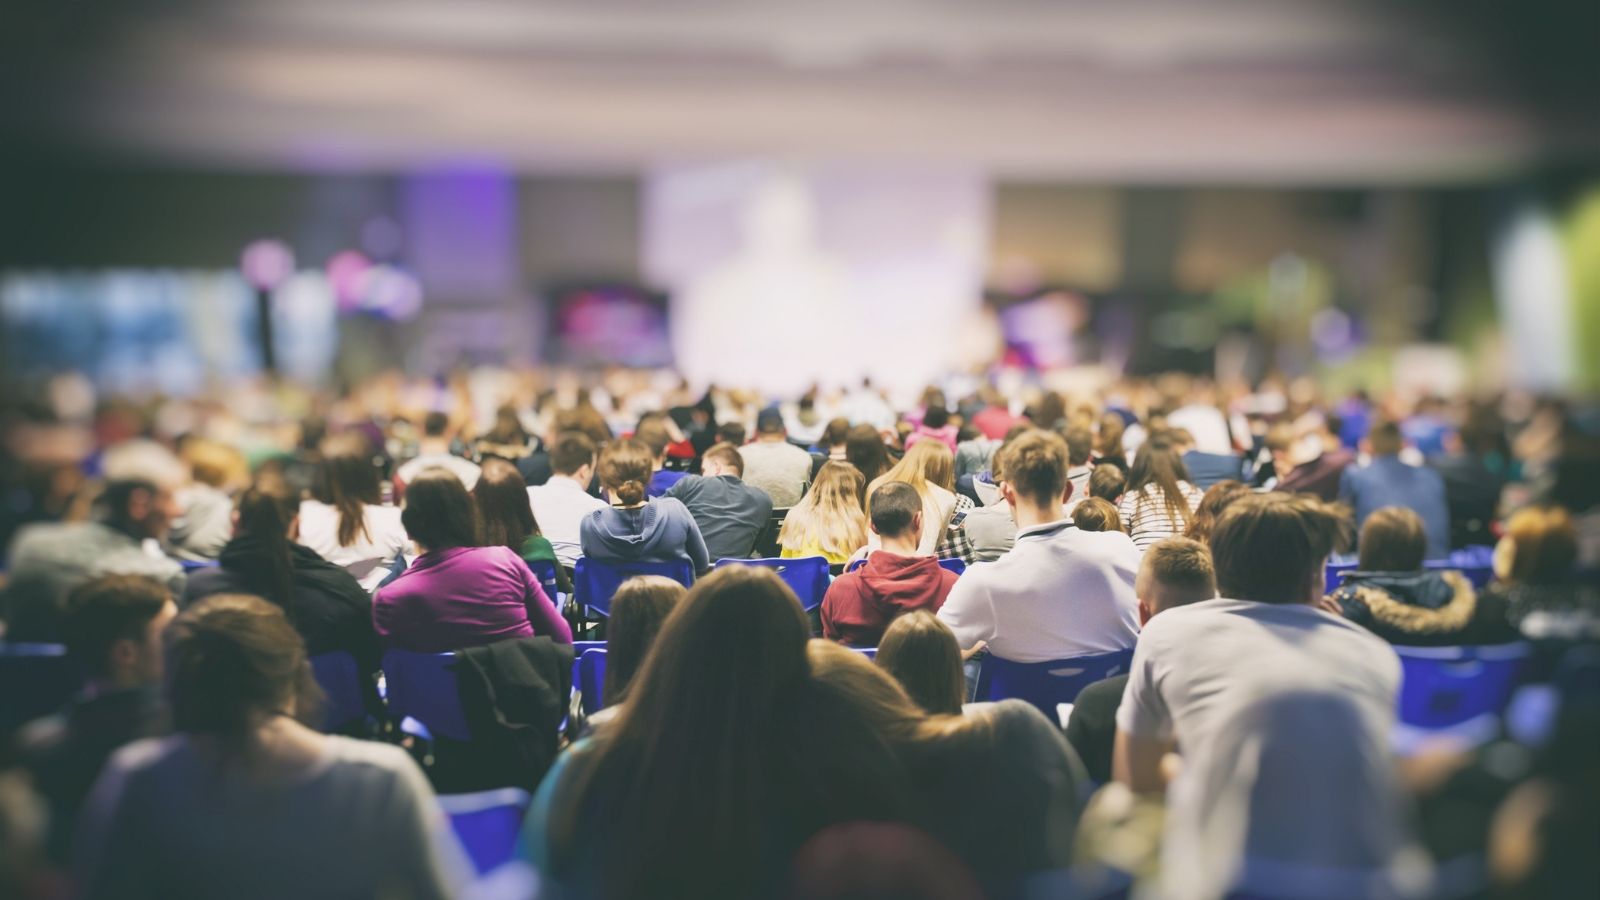 An audience sit at a conference, the image is blurred out